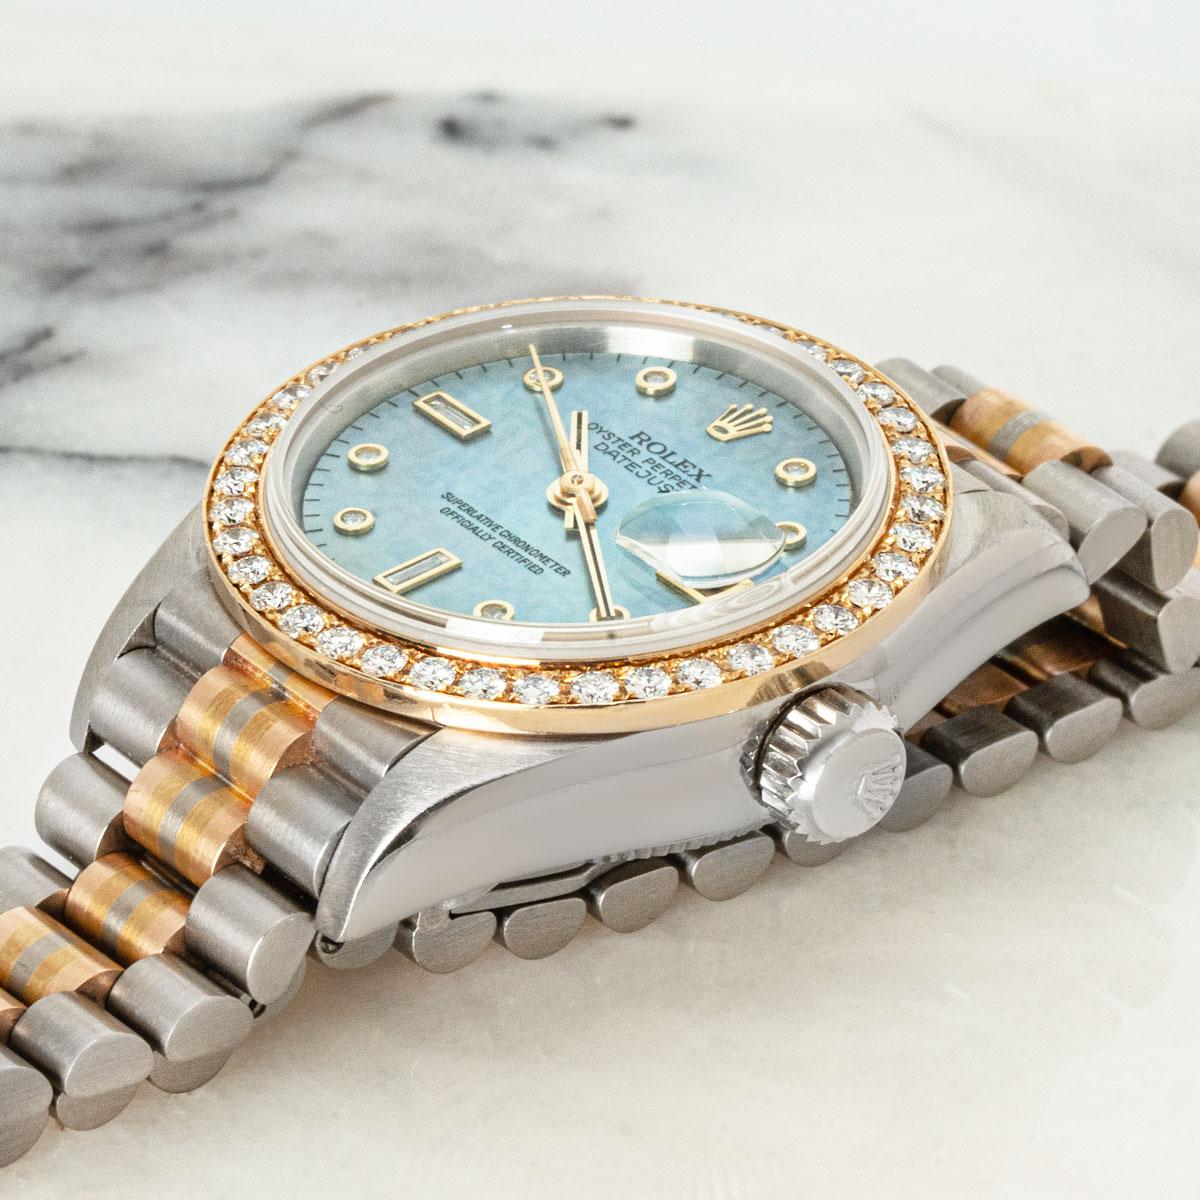 A 26mm Datejust in tri-gold by Rolex. Featuring a Tahitian mother of pearl dial with diamond set hour markers and a fixed yellow gold bezel set with 40 round brilliant cut diamonds.

Fitted with a sapphire crystal and a self-winding automatic